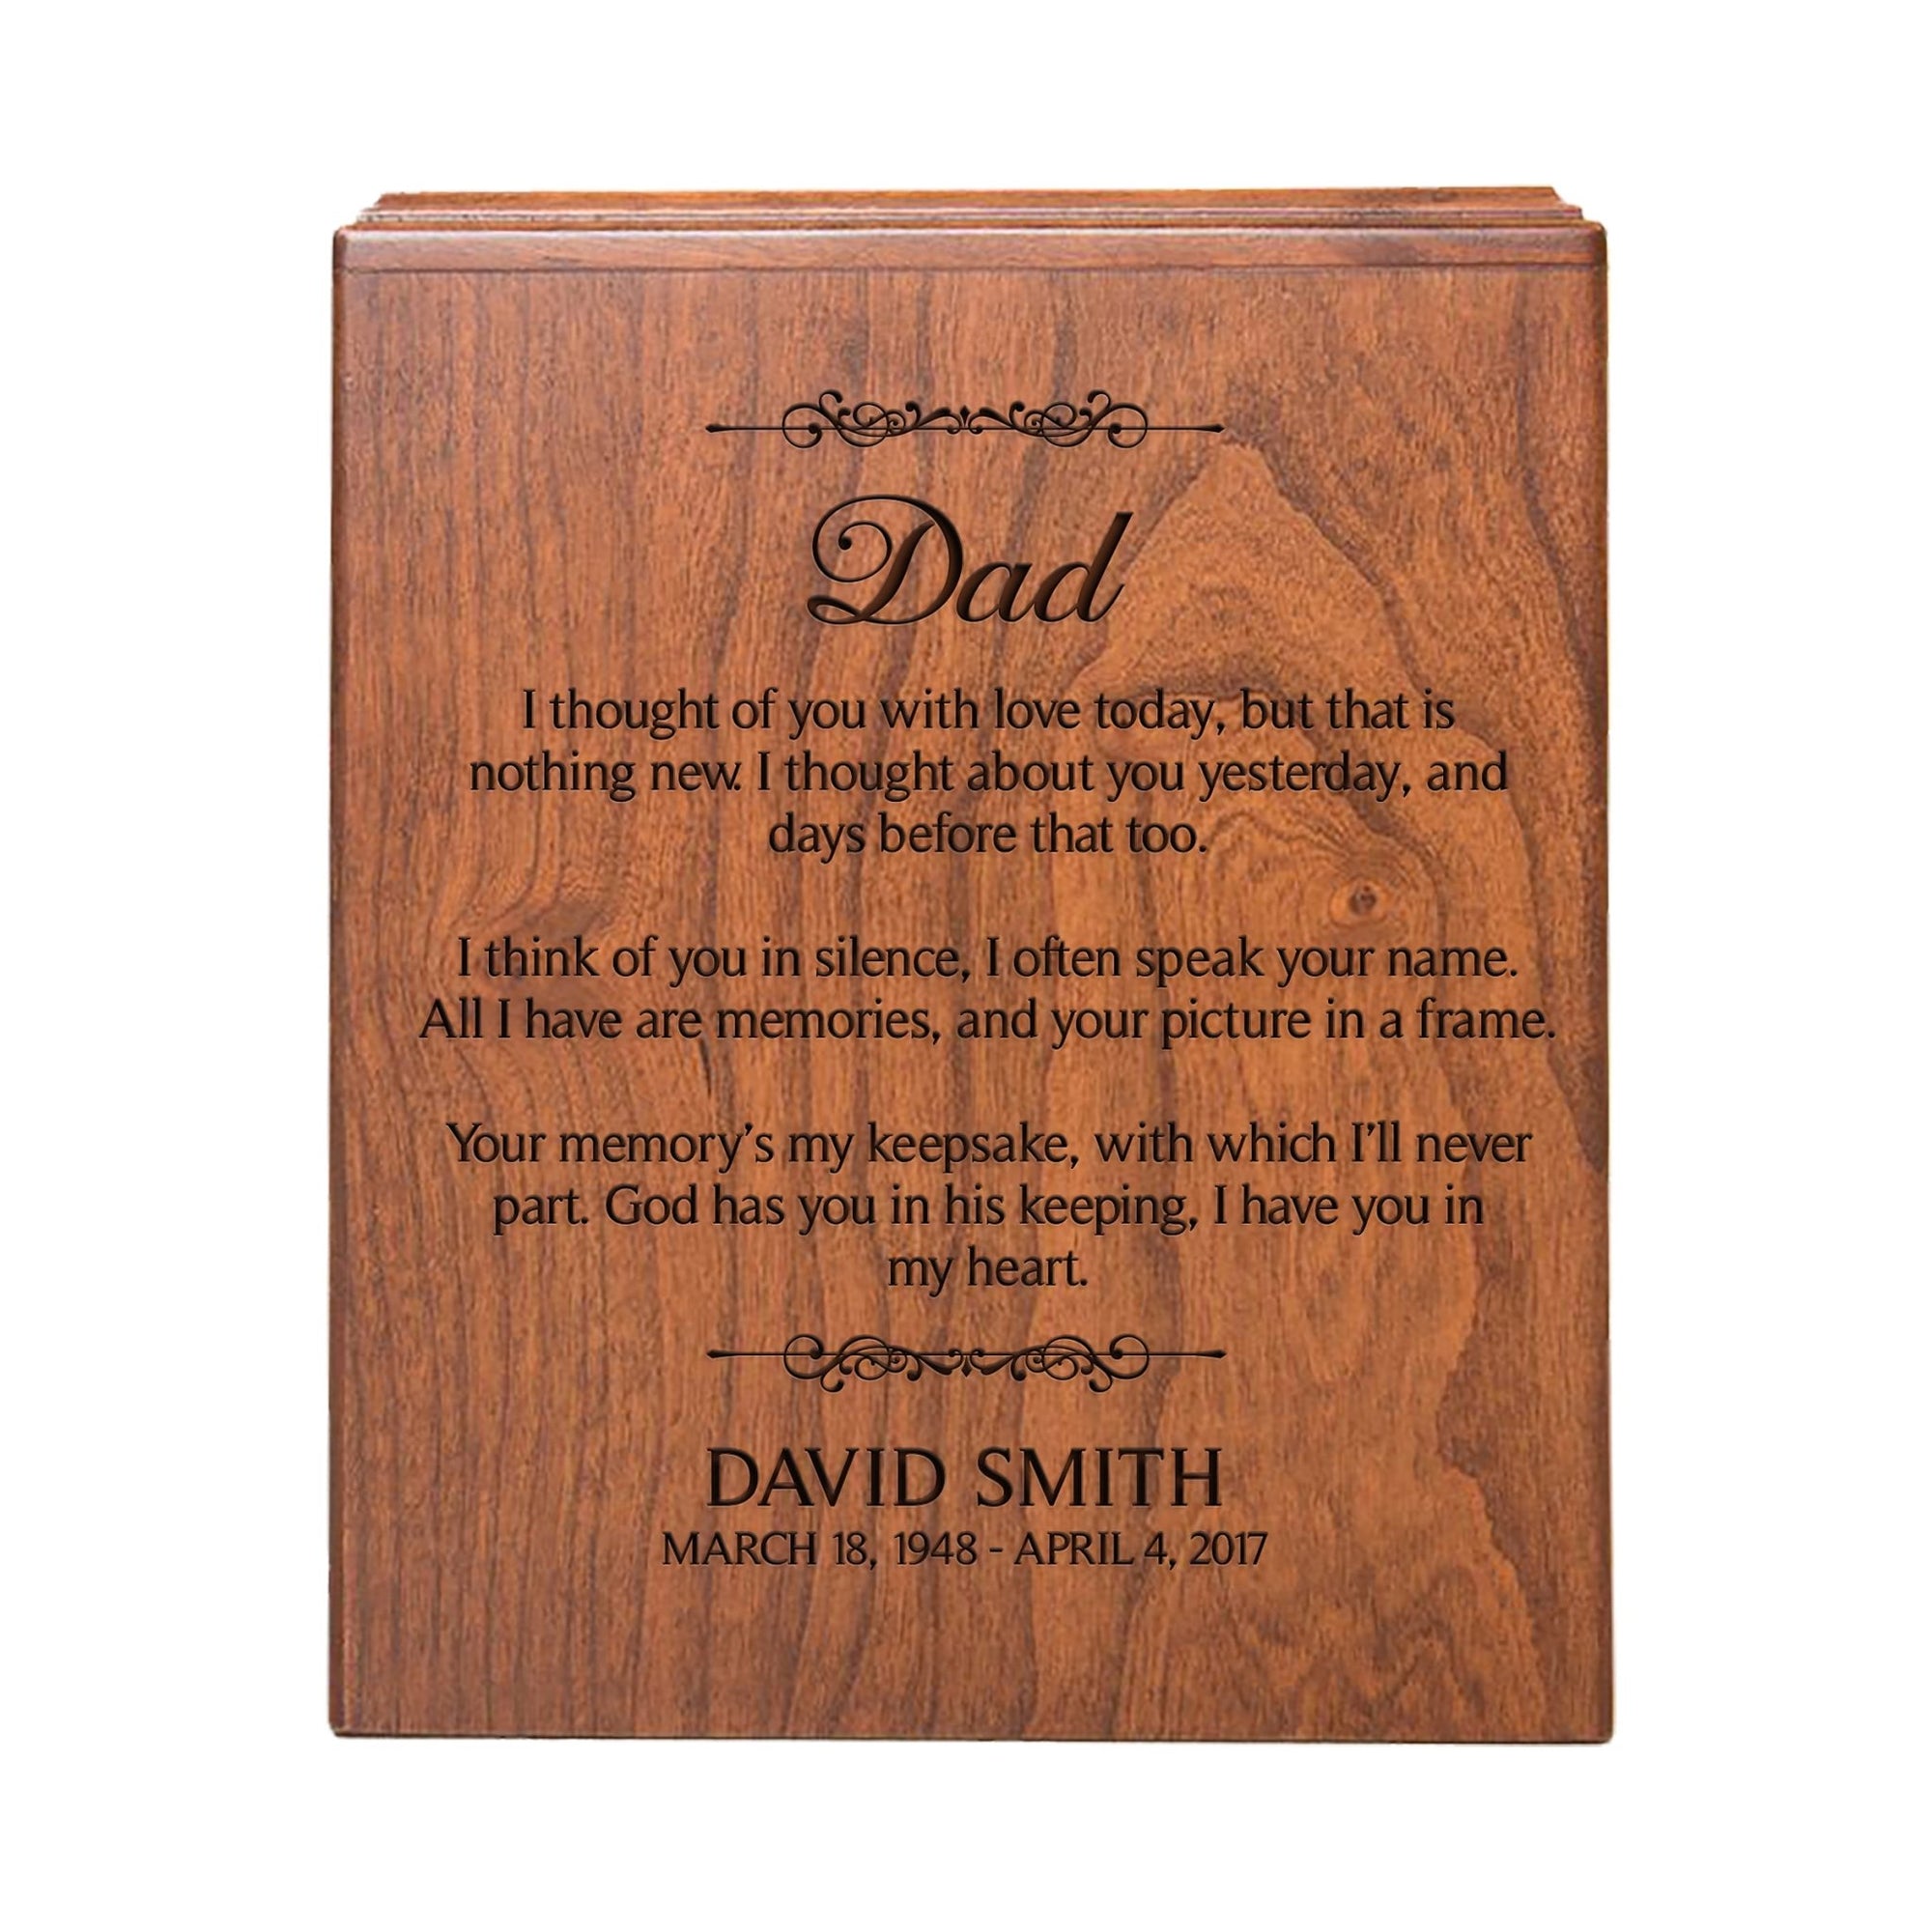 Personalized Wooden Memorial Cremation Urn Box - I Thought of You - LifeSong Milestones